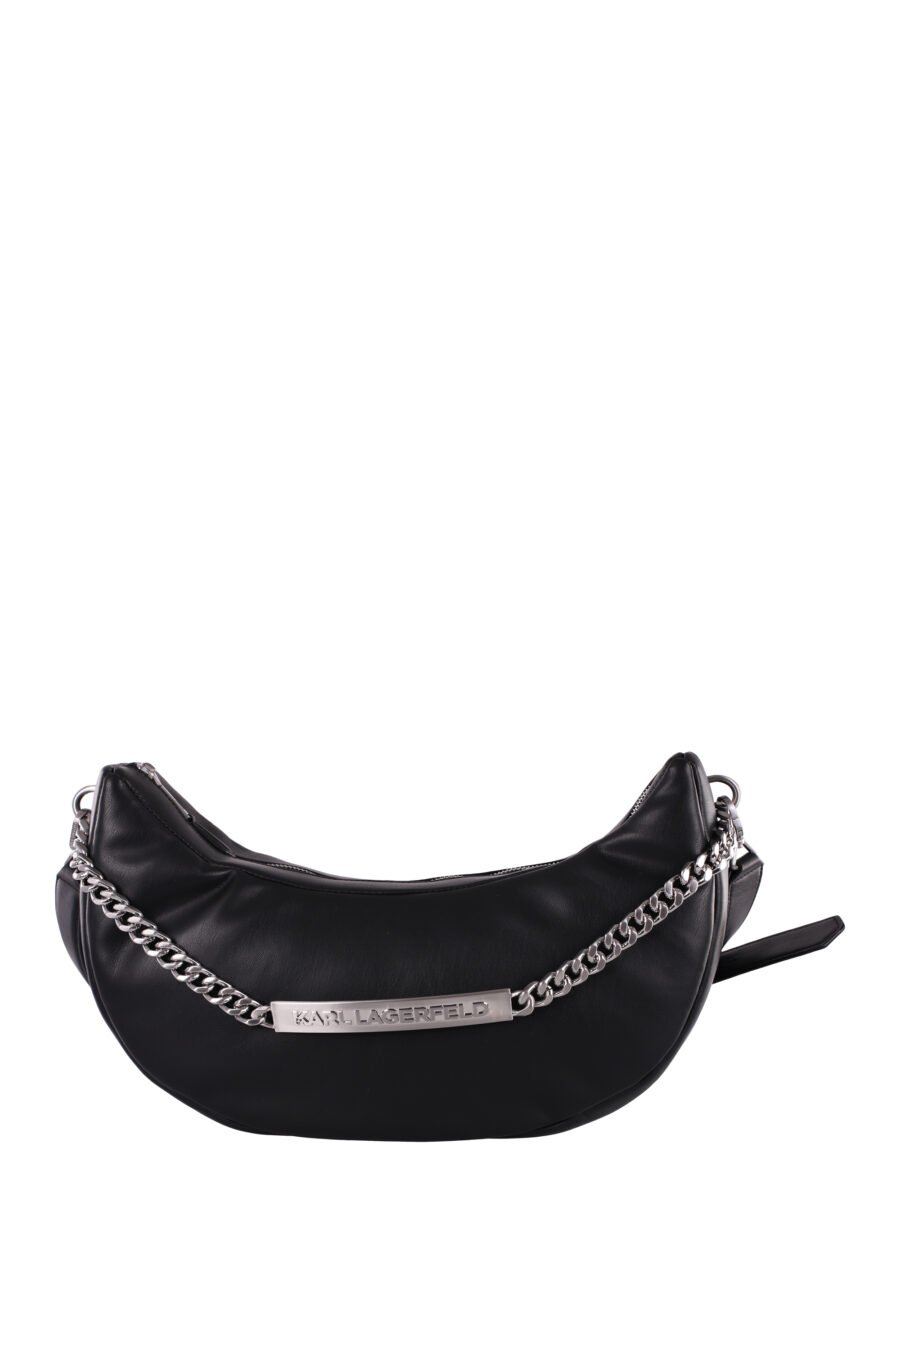 Black hobo bag with silver plated chain - IMG 6042